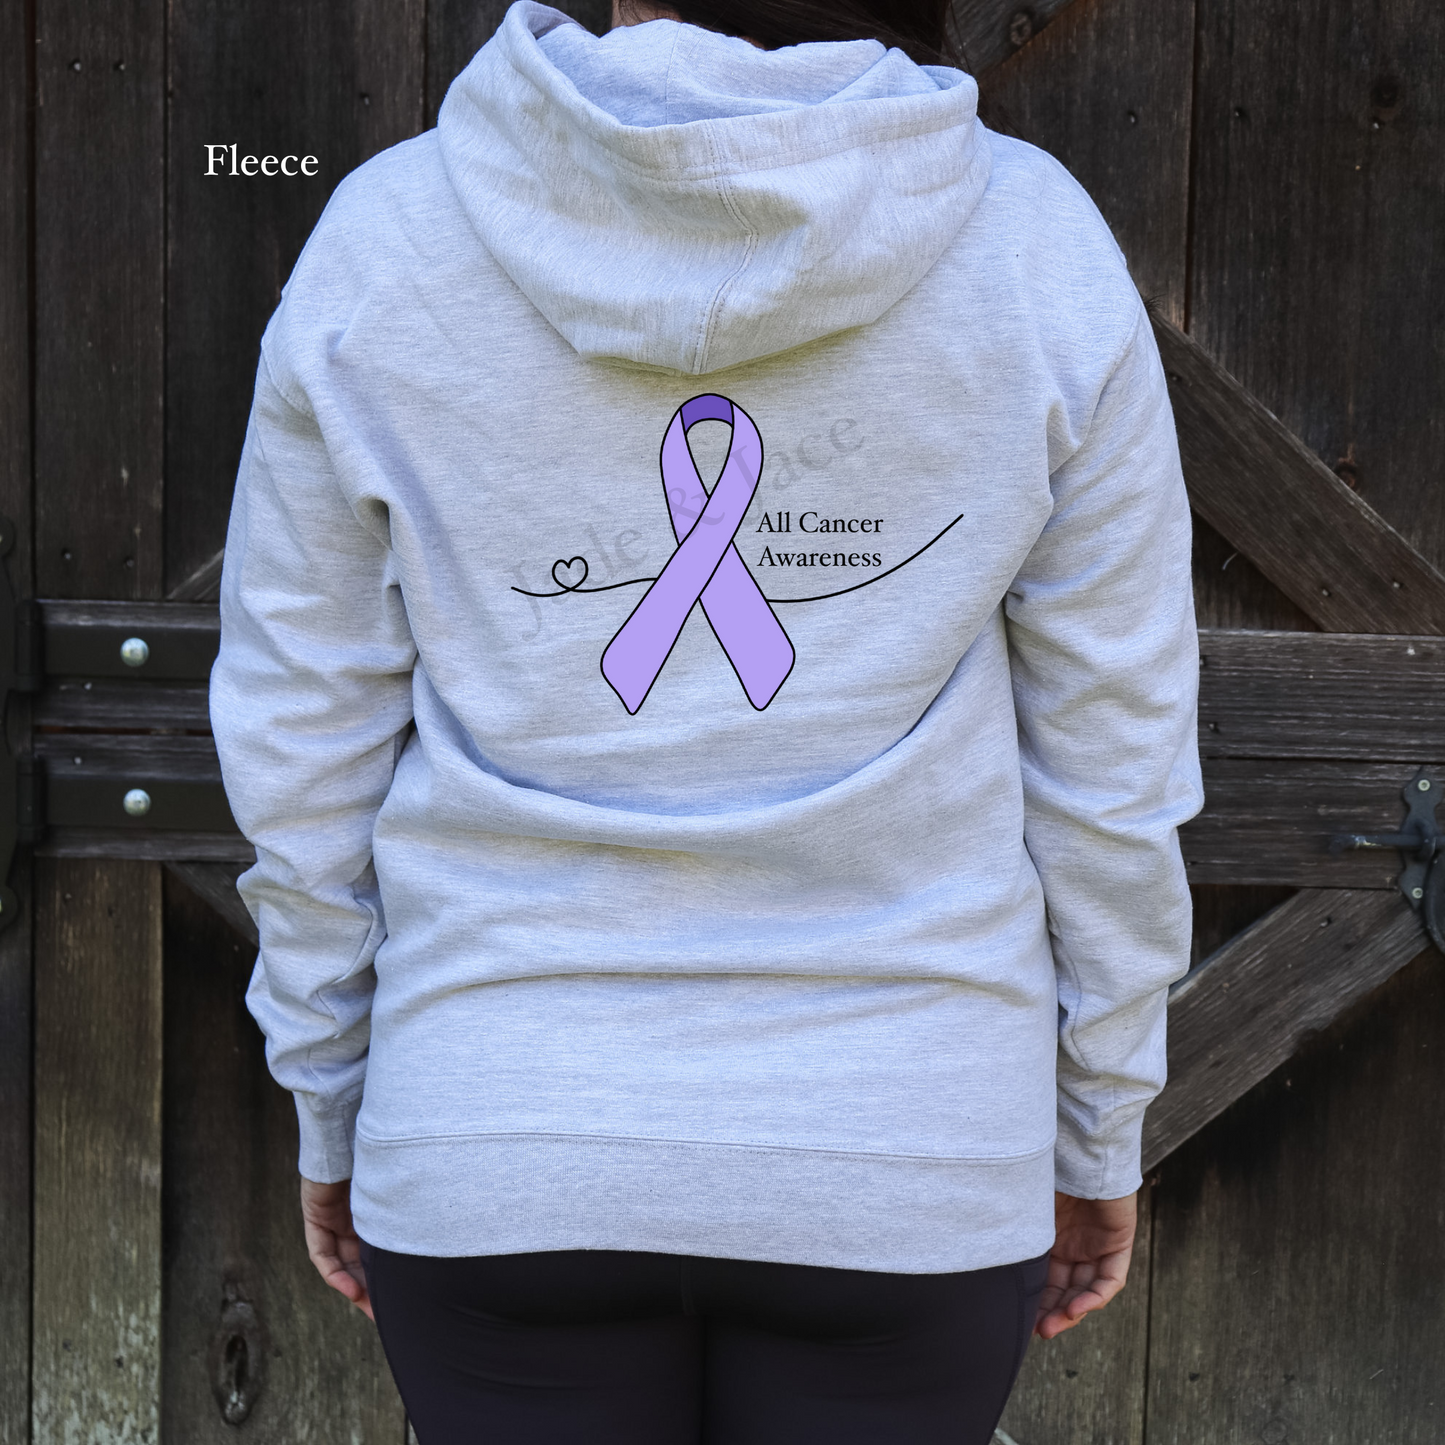 All Cancer Awareness Hoodie